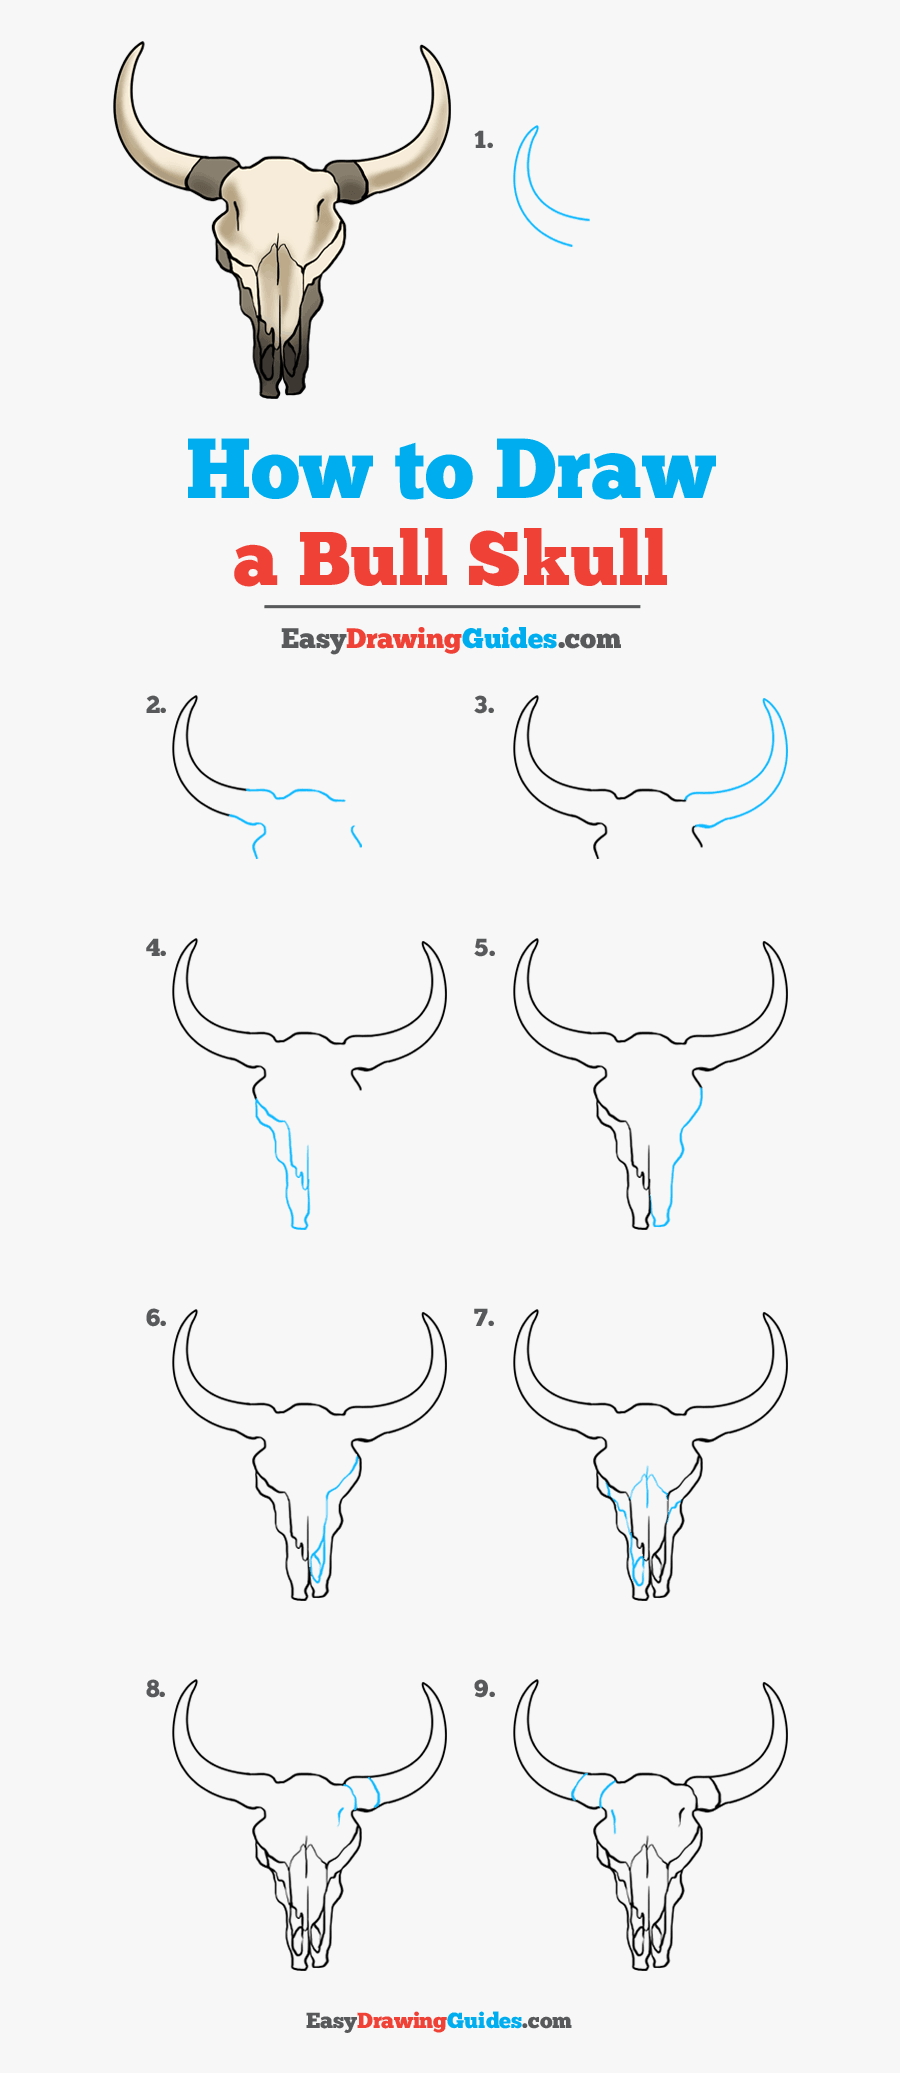 How To Draw Bull Skull - Joker Drawing Easy Step By Step, Transparent Clipart